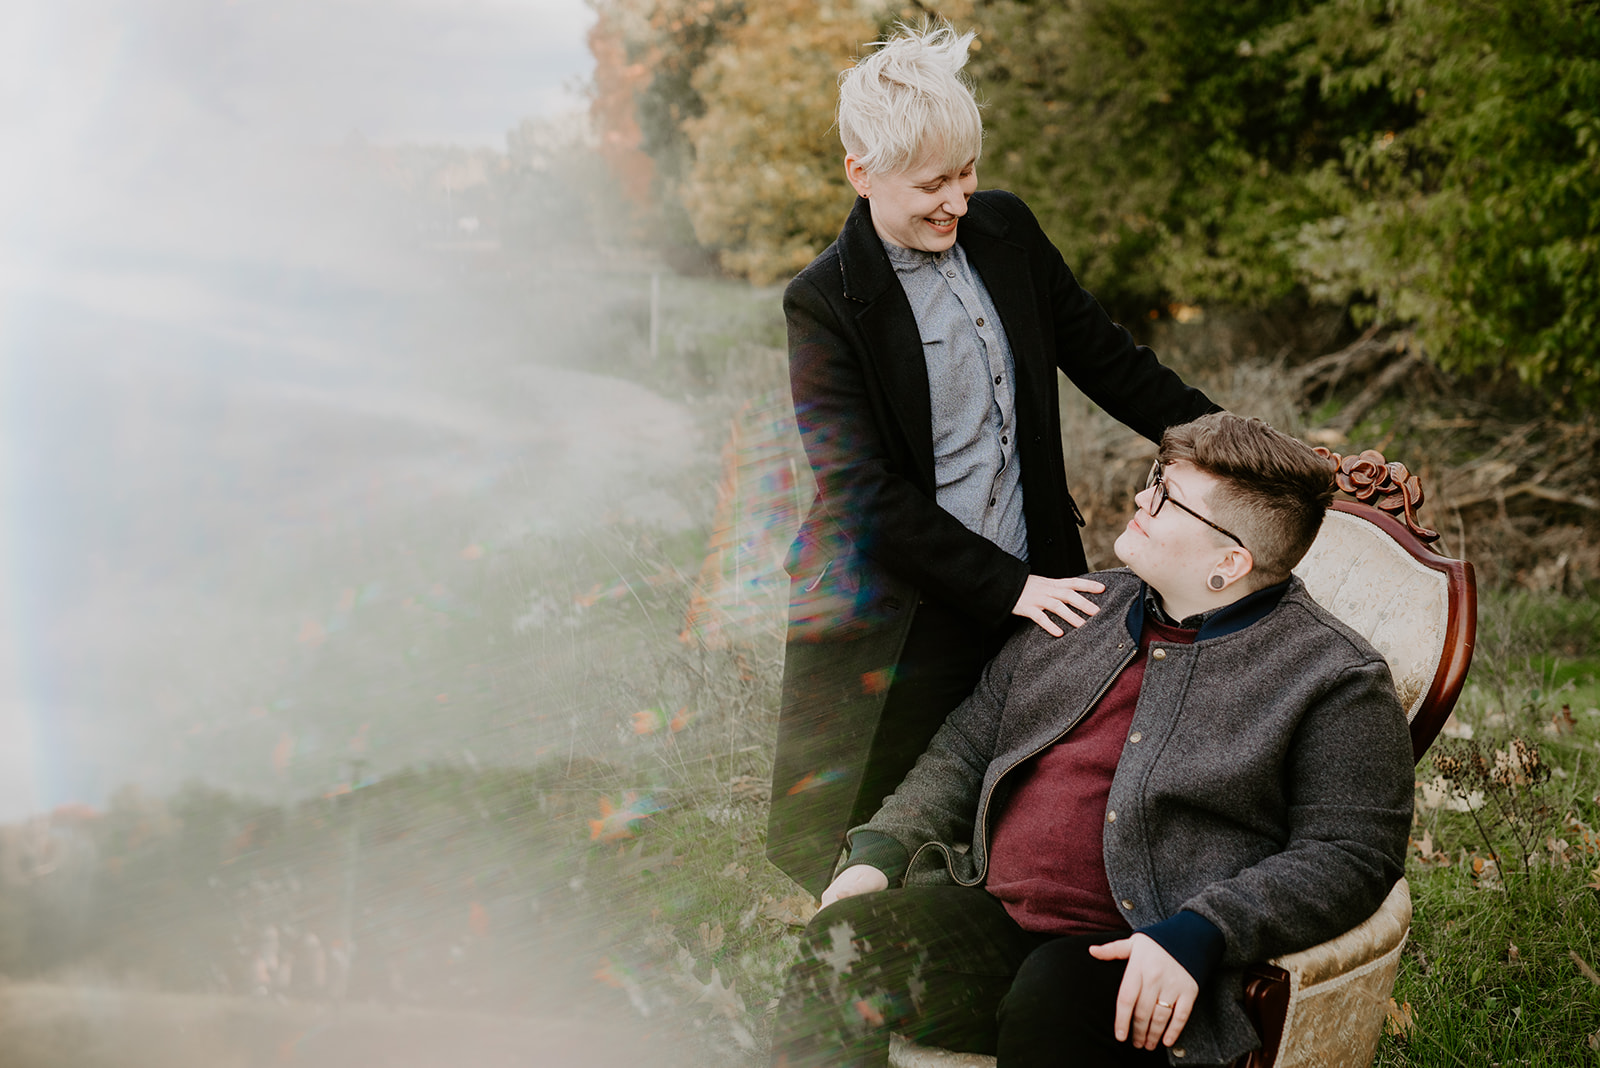 grand rapids engagement session with trans couple non binary photographer in Michigan